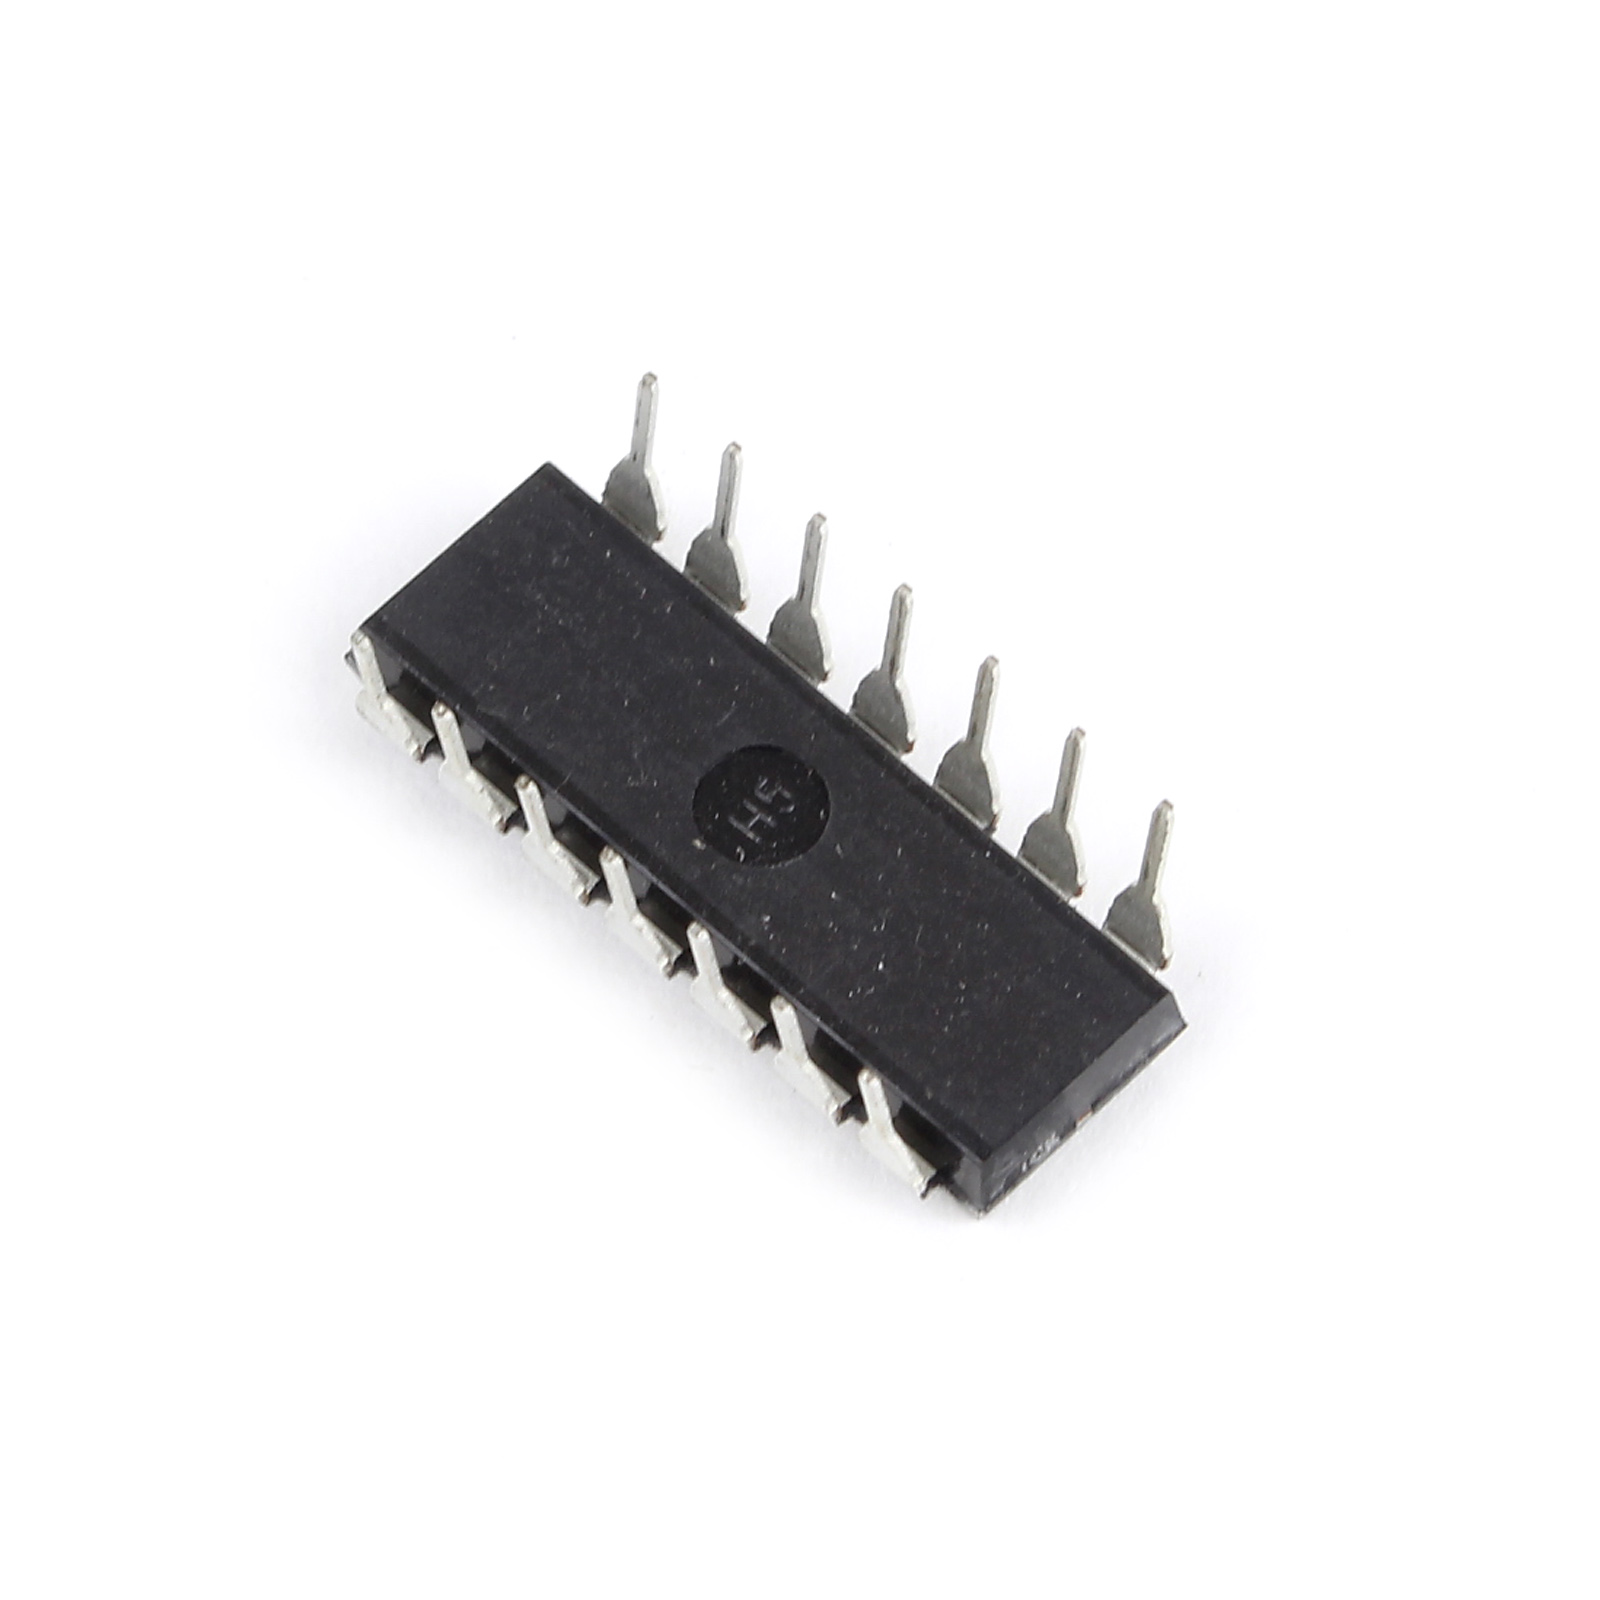 AOYUE Spare Part LM324 DIP14 Low Power Operational Amplifier